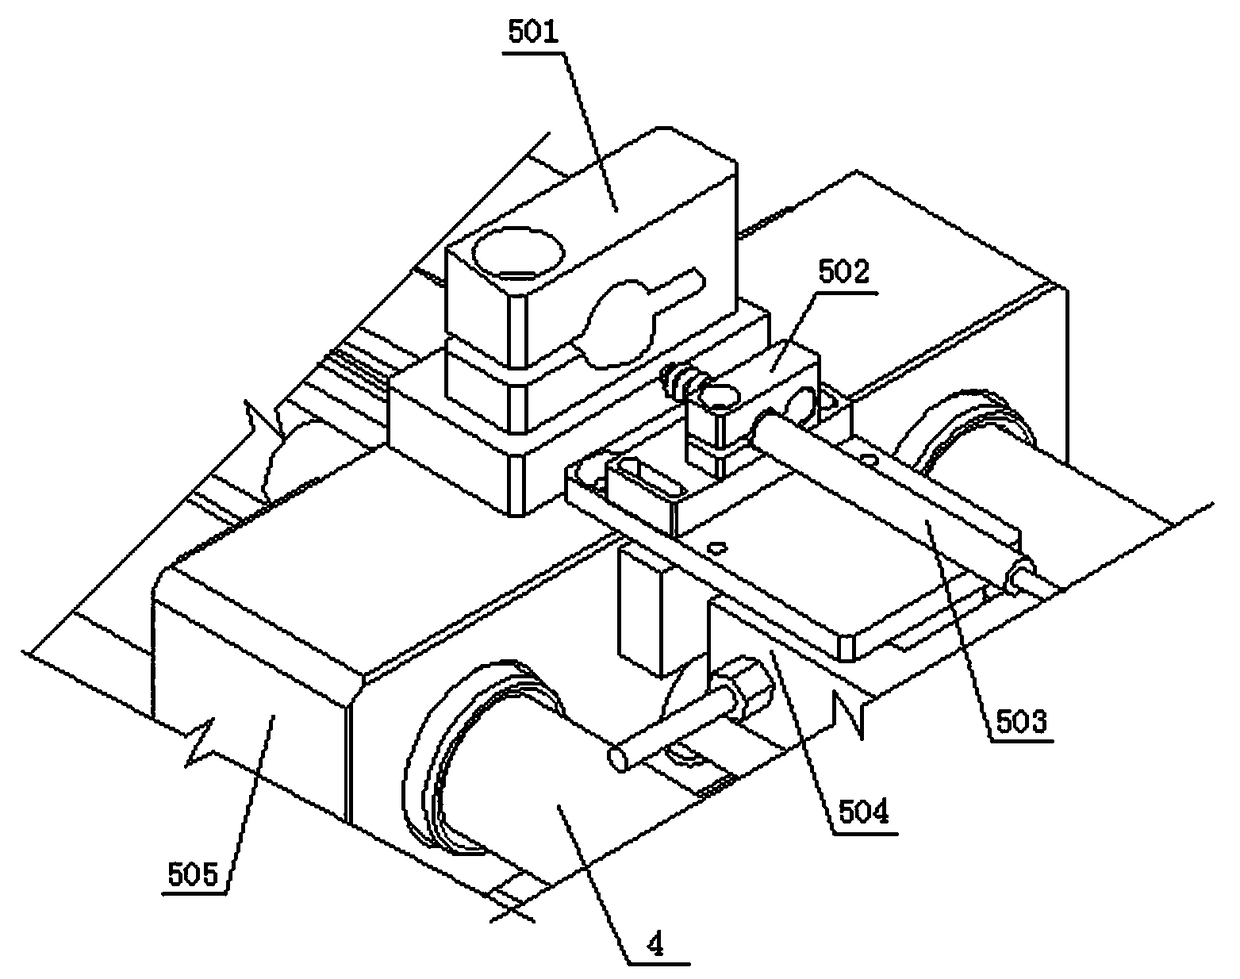 Clamping mechanism for vibrating wire strain sensor calibration device